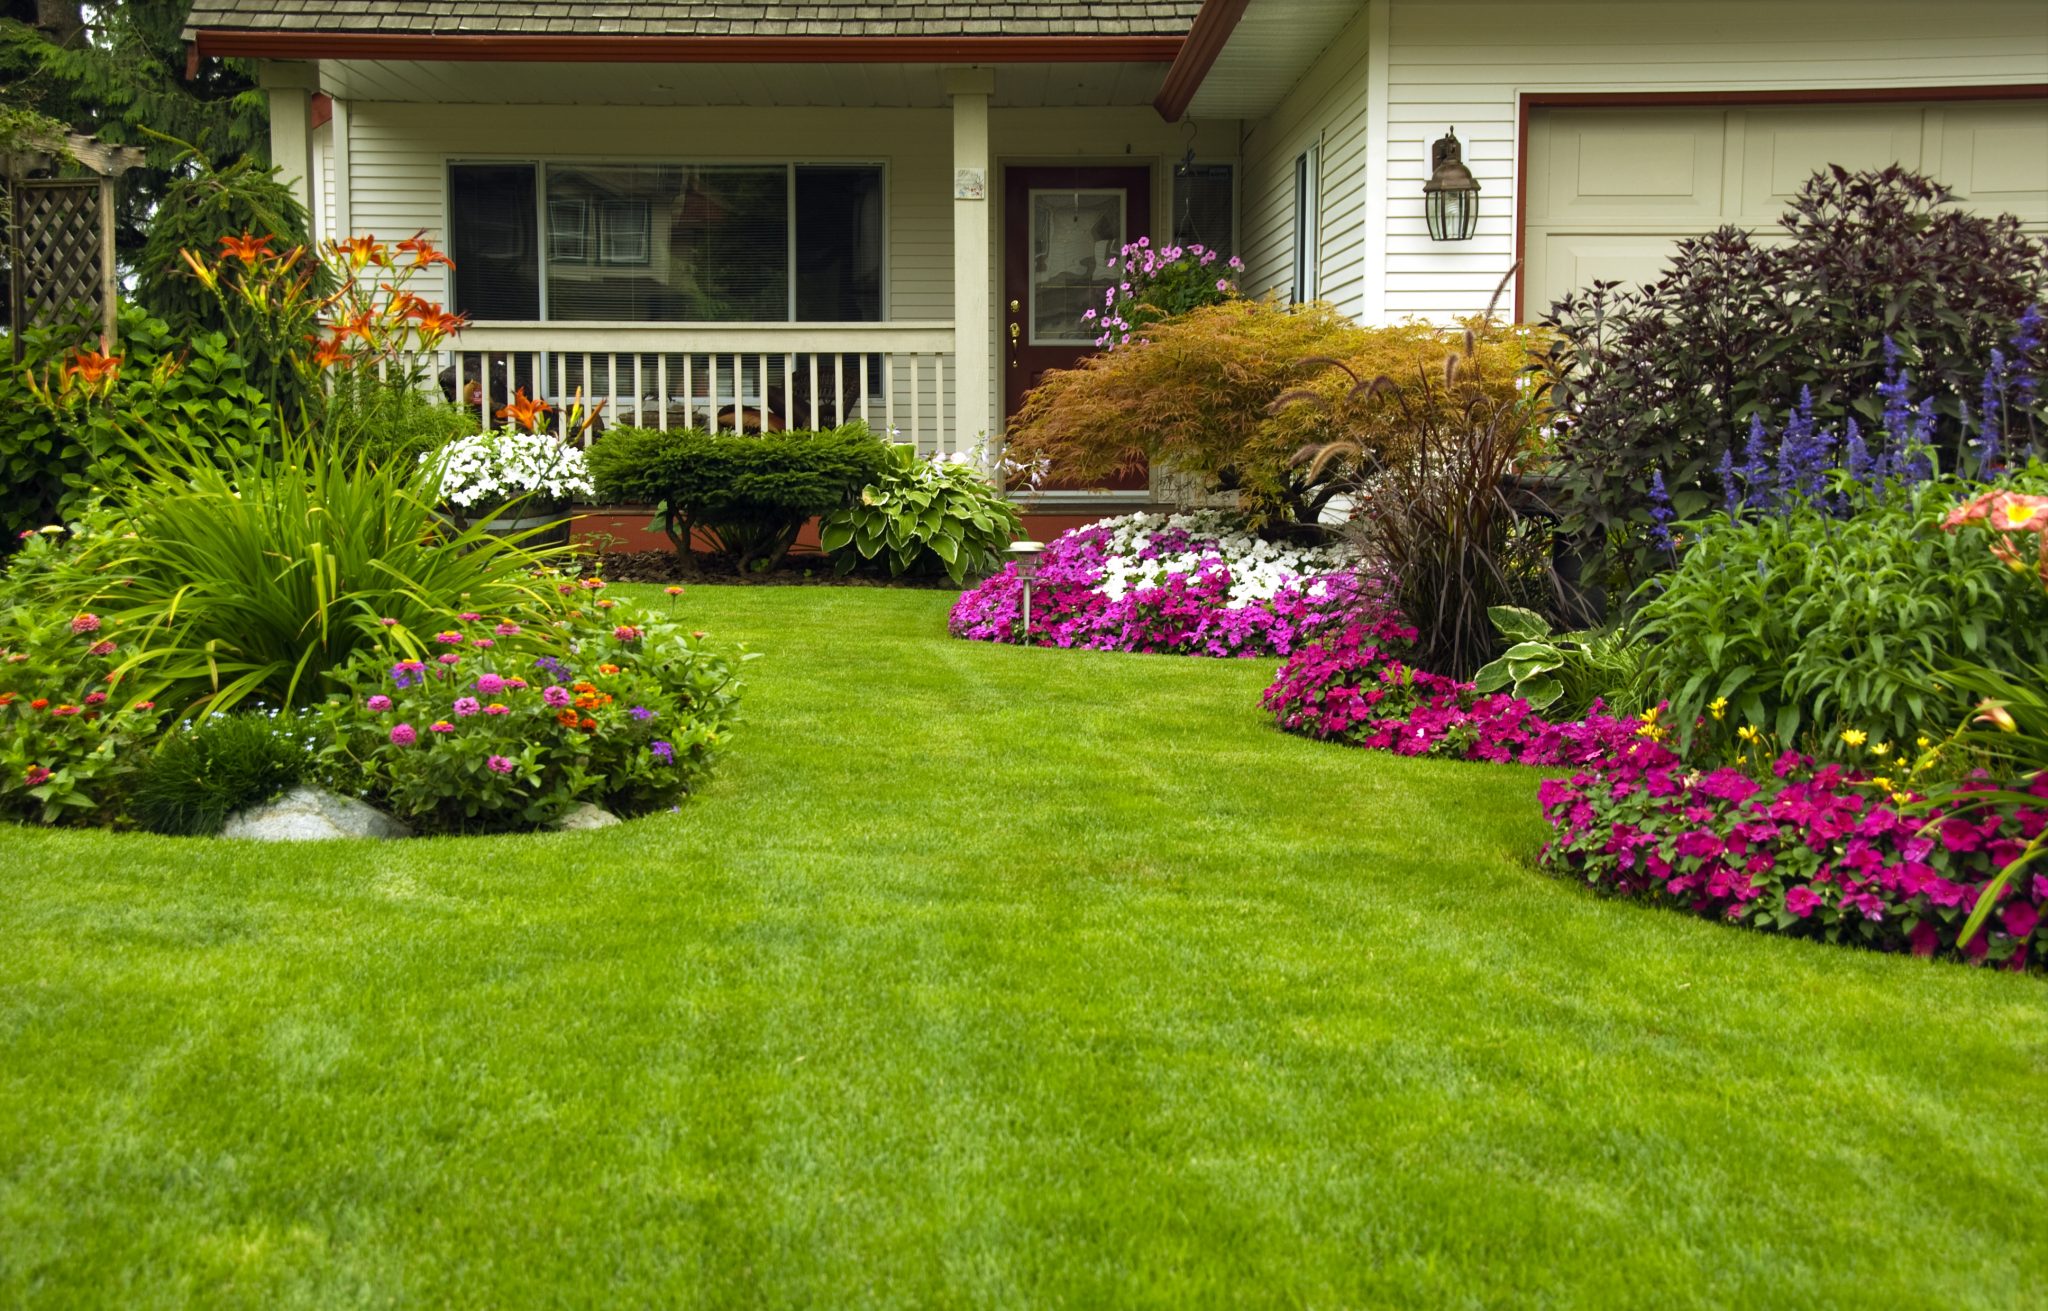 Planning Front Yard For Landscaping Affordable Lawn Care - How To Prepare Your Front Yard For Landscaping